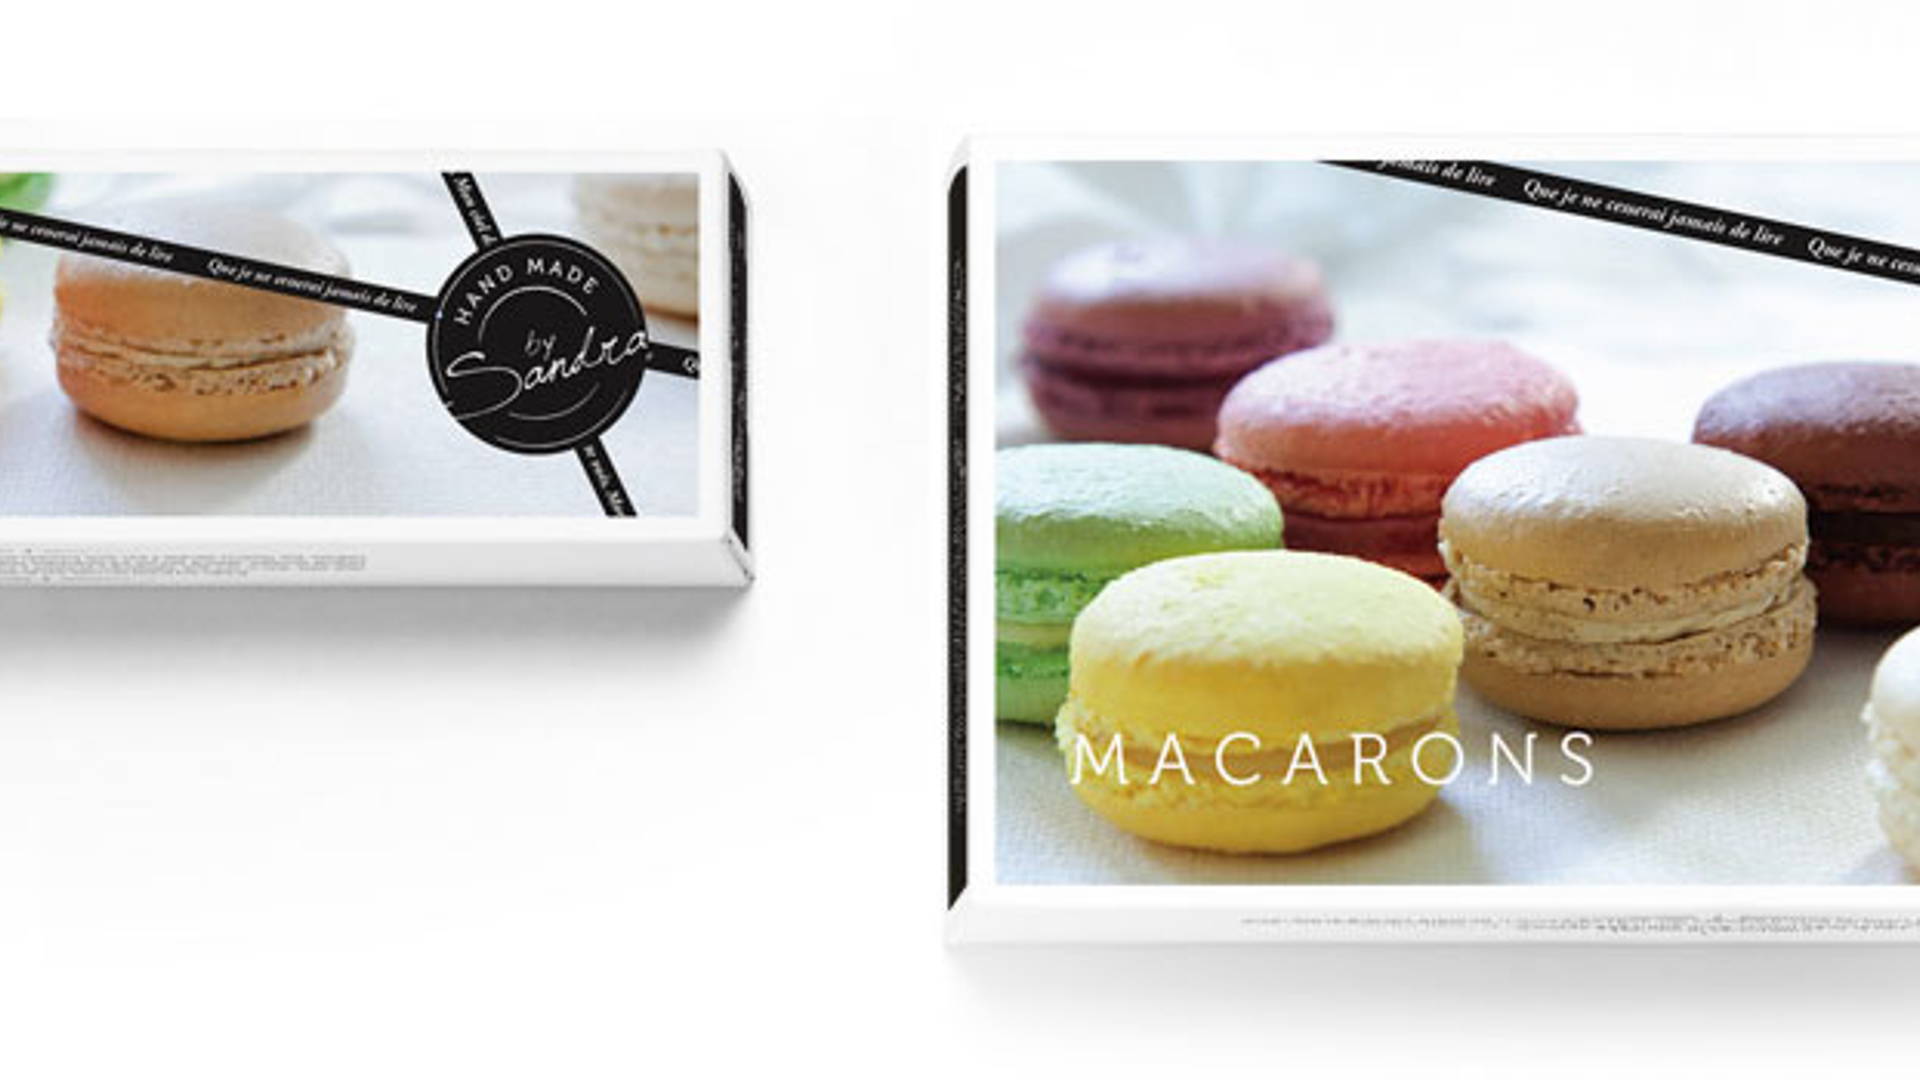 Featured image for Sandra Macaroons